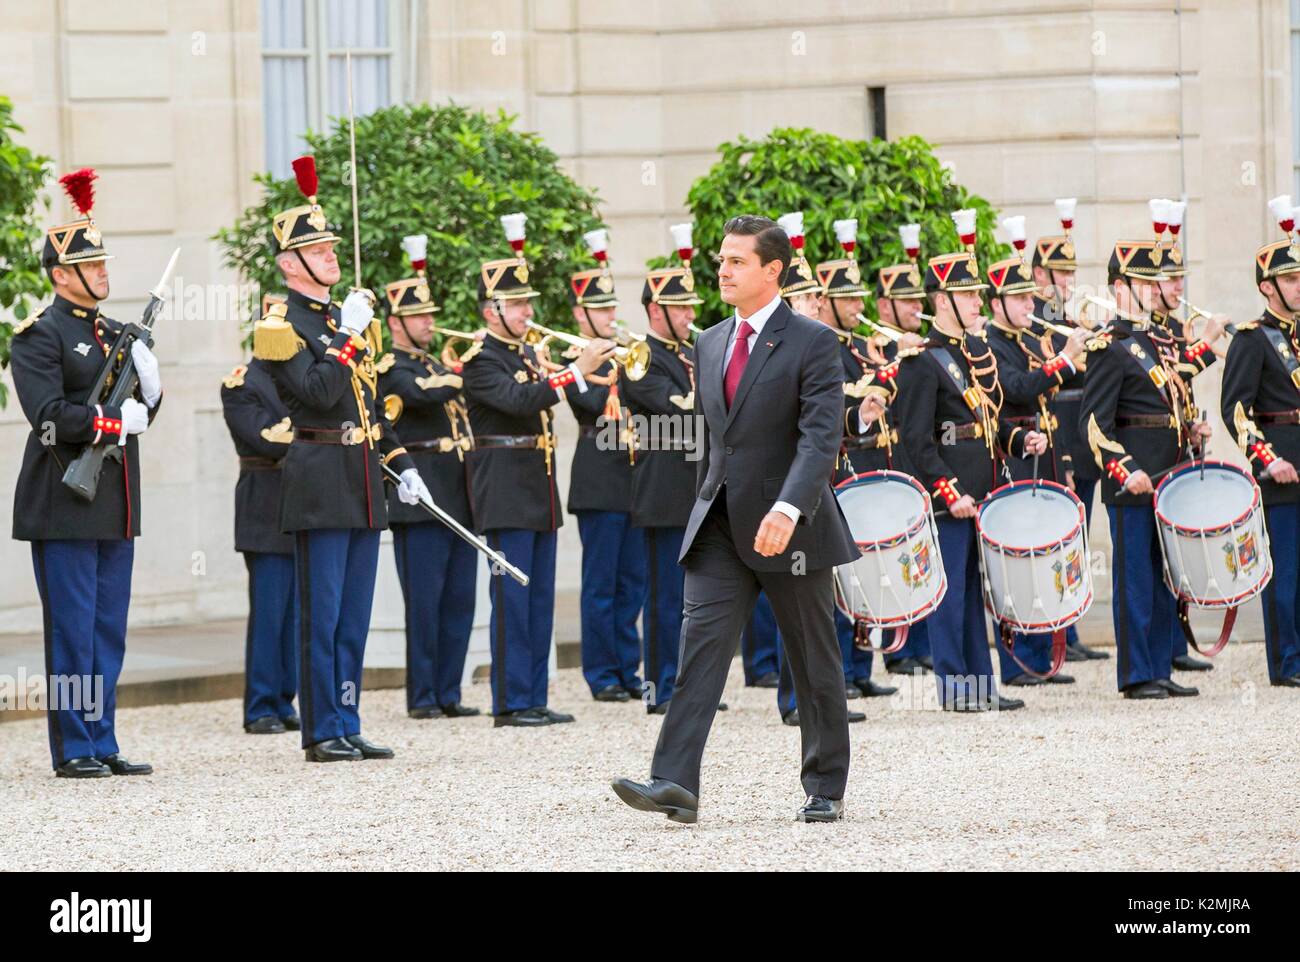 Mexican President Enrique Pena Nieto reviews the troops during arrival ceremonies at the Elysee Palace for meeting with French President Emmanuel Macron July 7, 2017 in Paris, France. Stock Photo